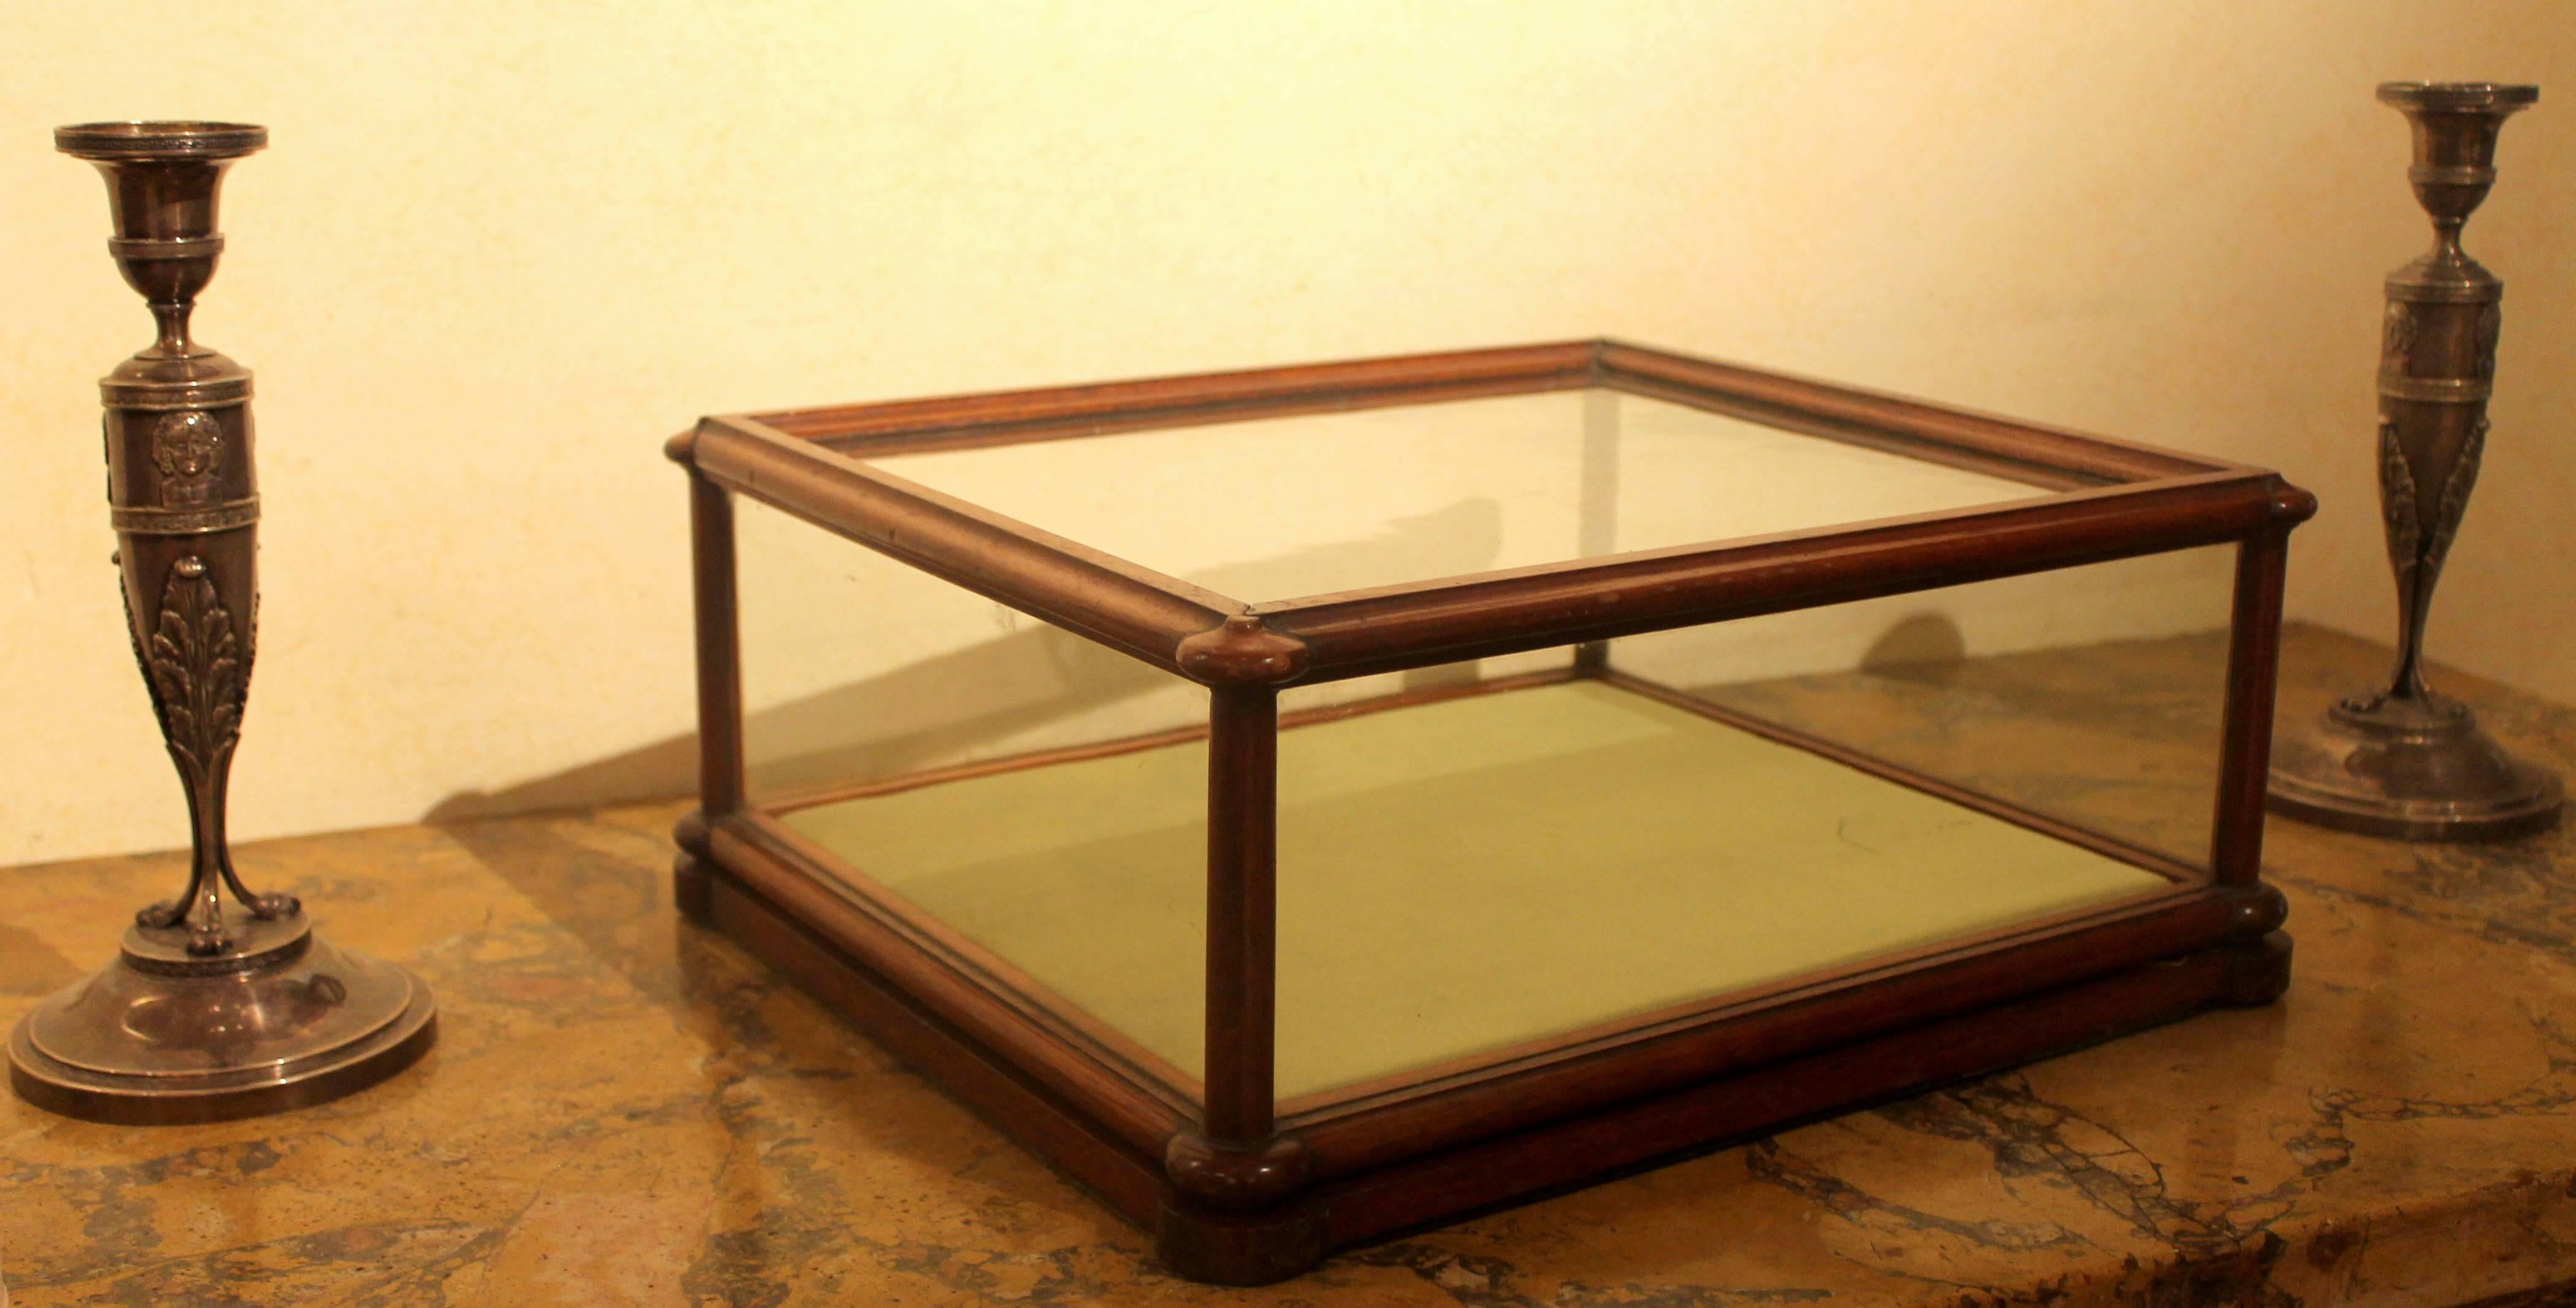 Hand-Carved 19th Century Rectangular English Mahogany Tabletop Display Case or Showcase 